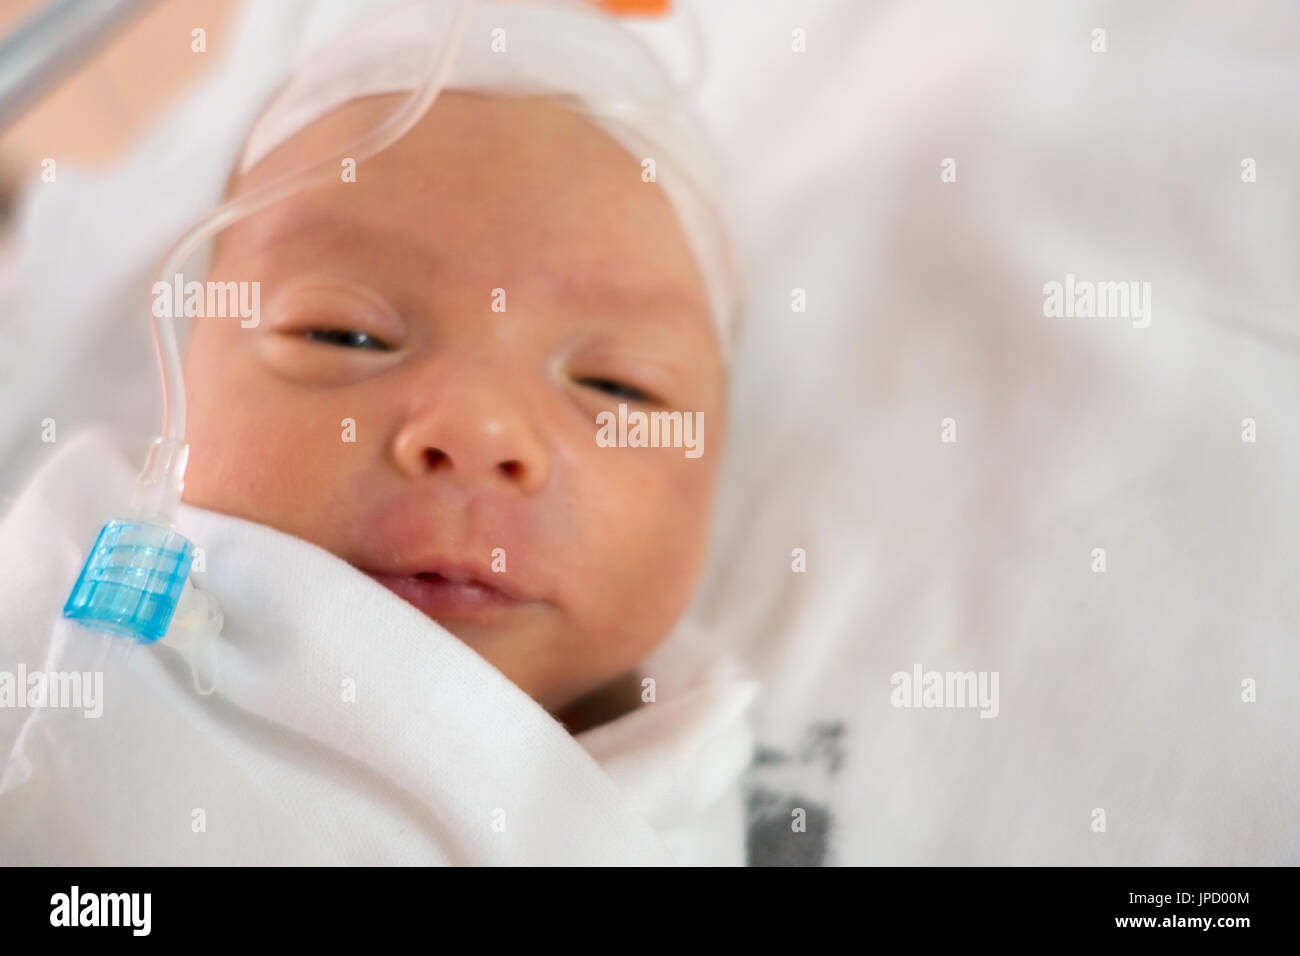 Close-up of newborn baby Banque D'Images